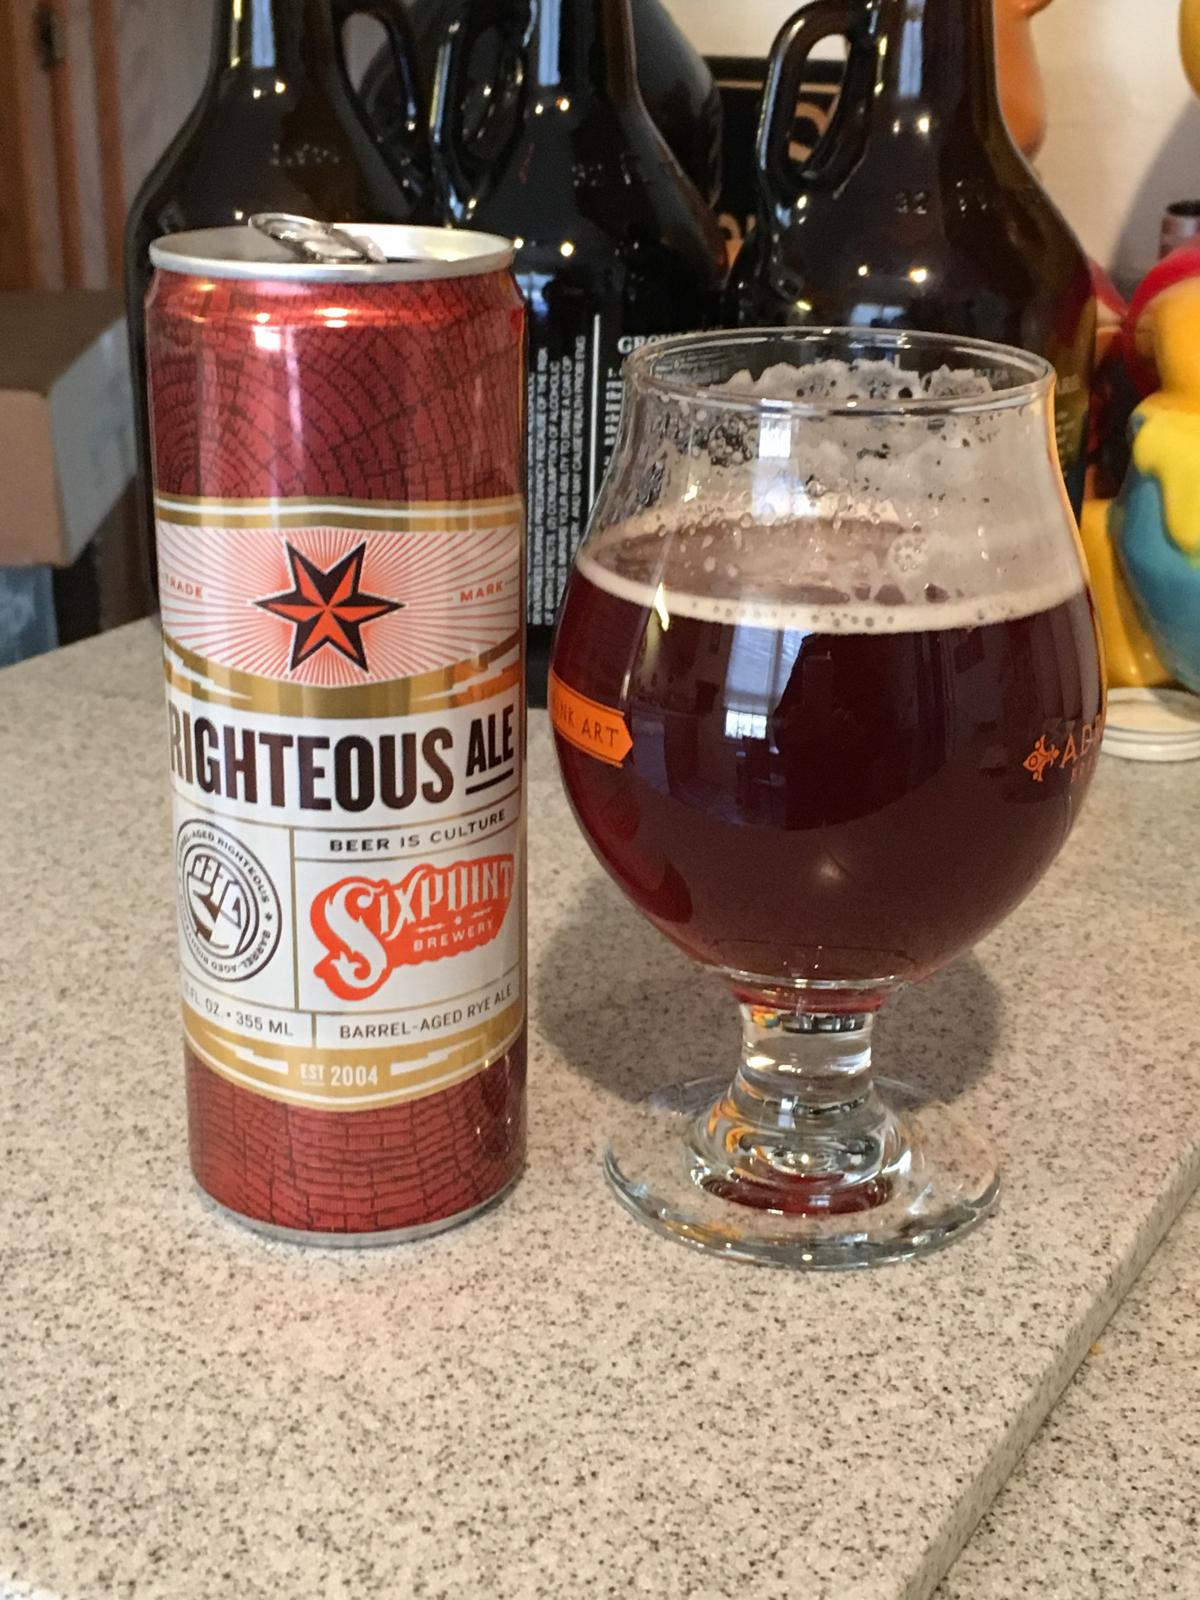 Righteous Ale (Barrel Aged)